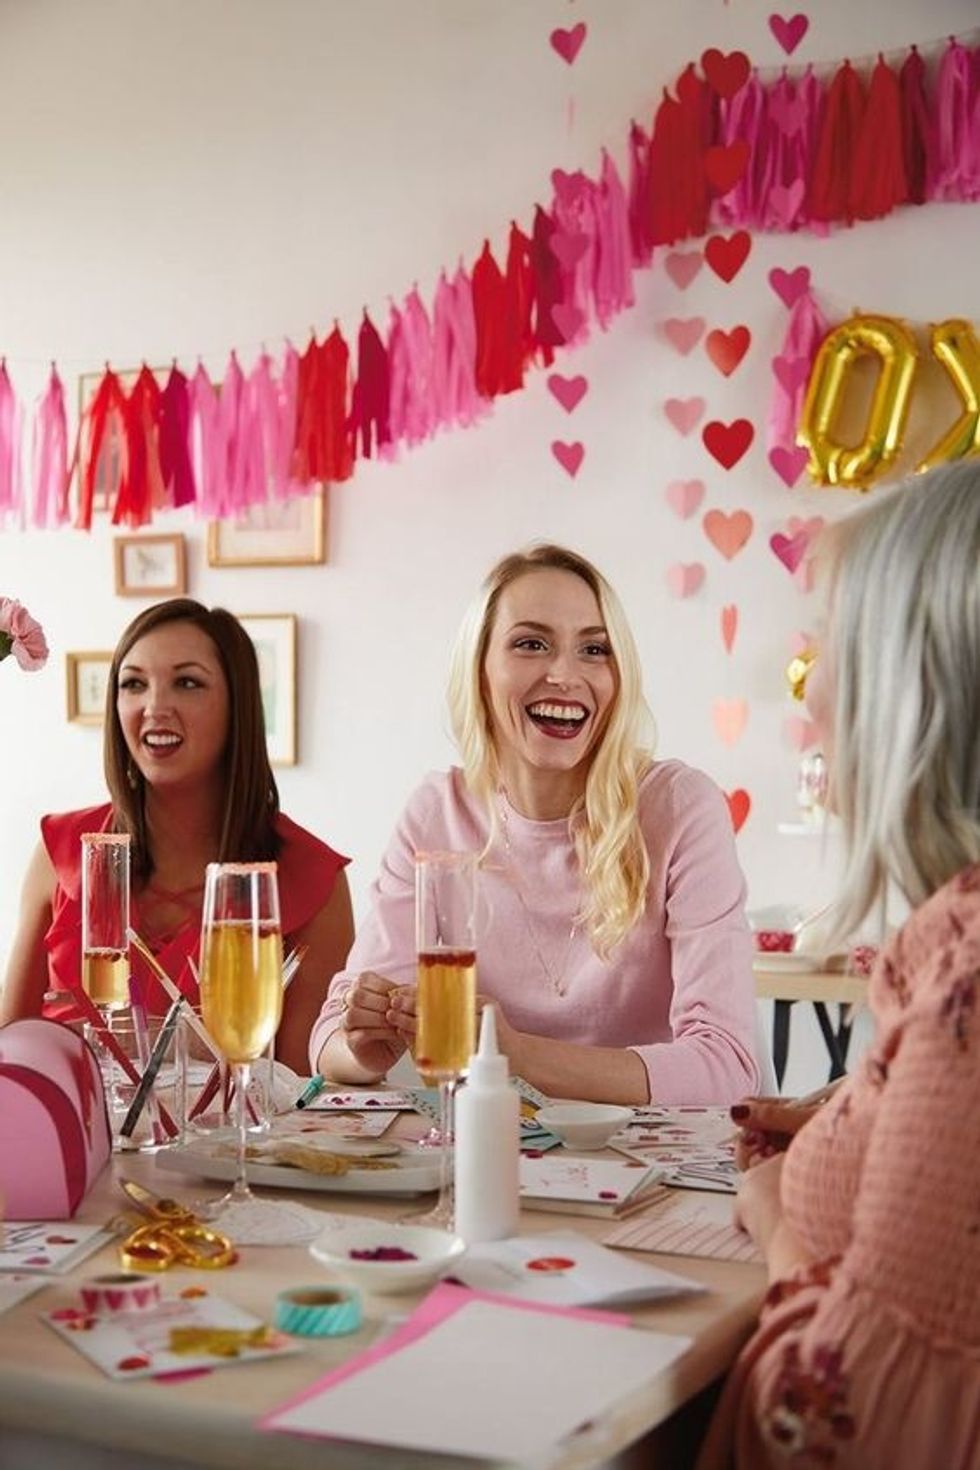 Galentine's Brunch as your bridal shower